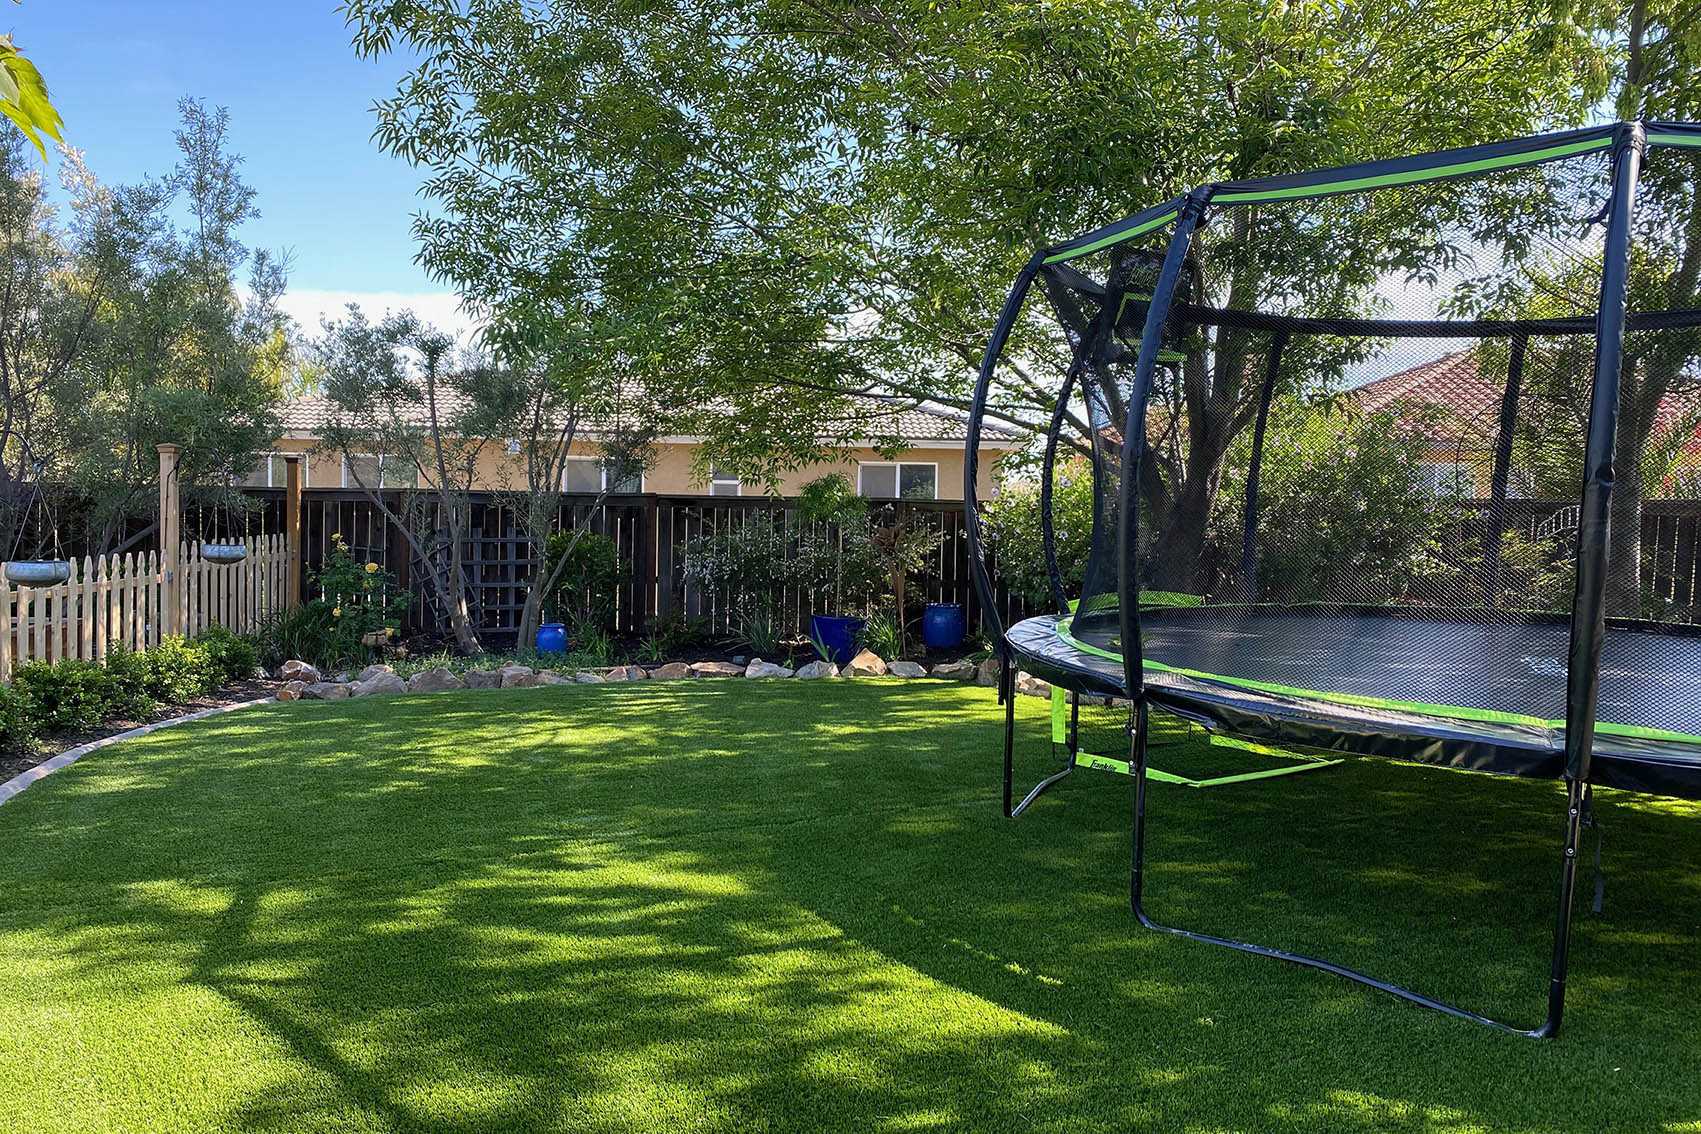 Trampoline in a residential back yard with artificial turf.